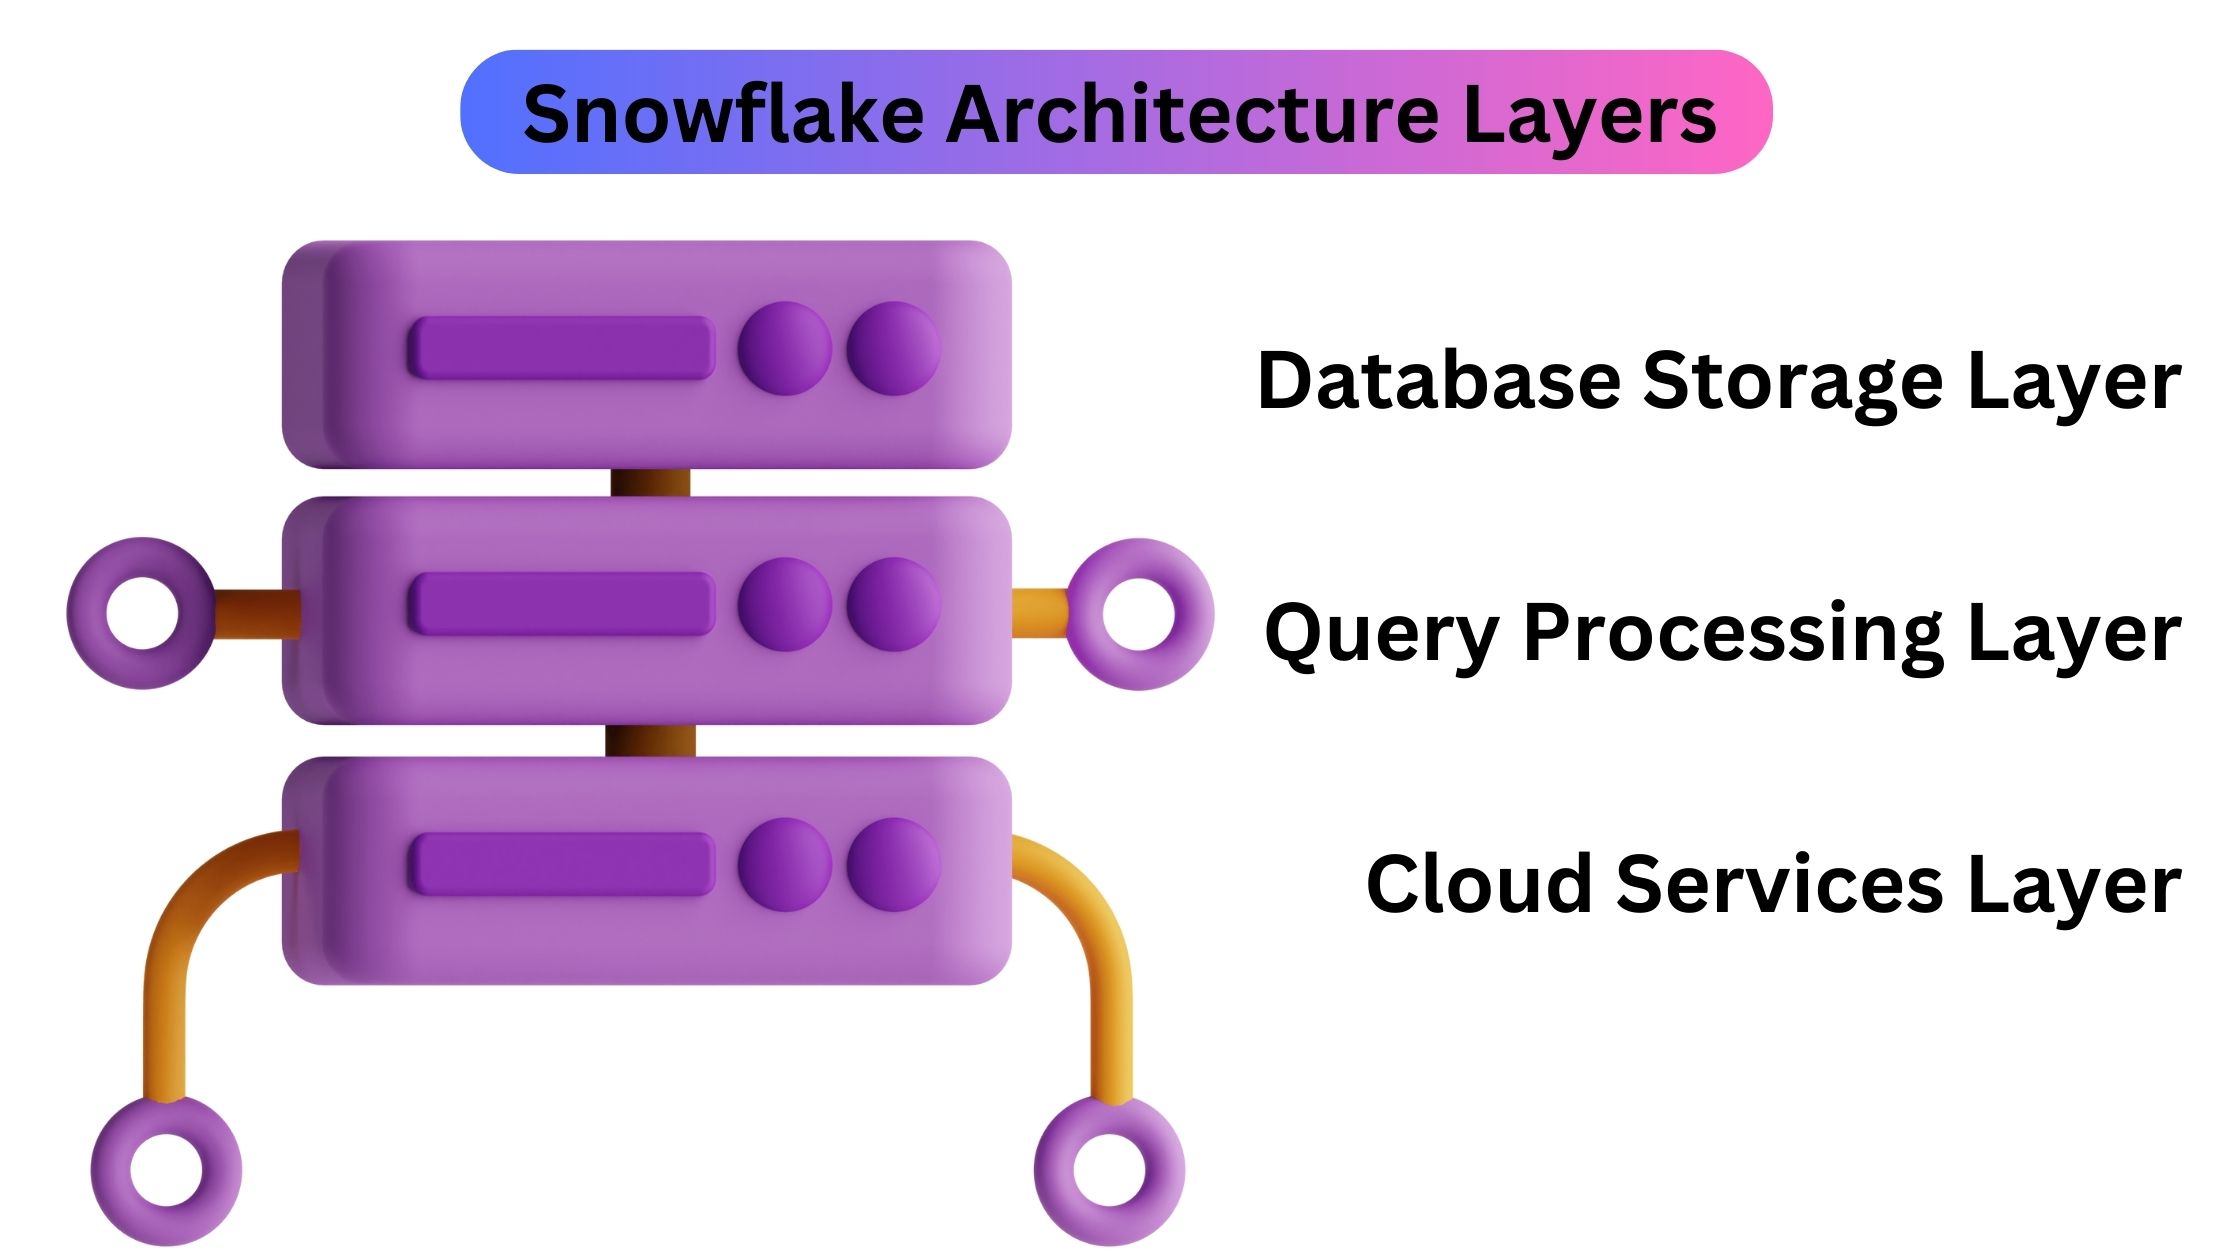 Snowflake Architecture Layers: An Extensive Analysis